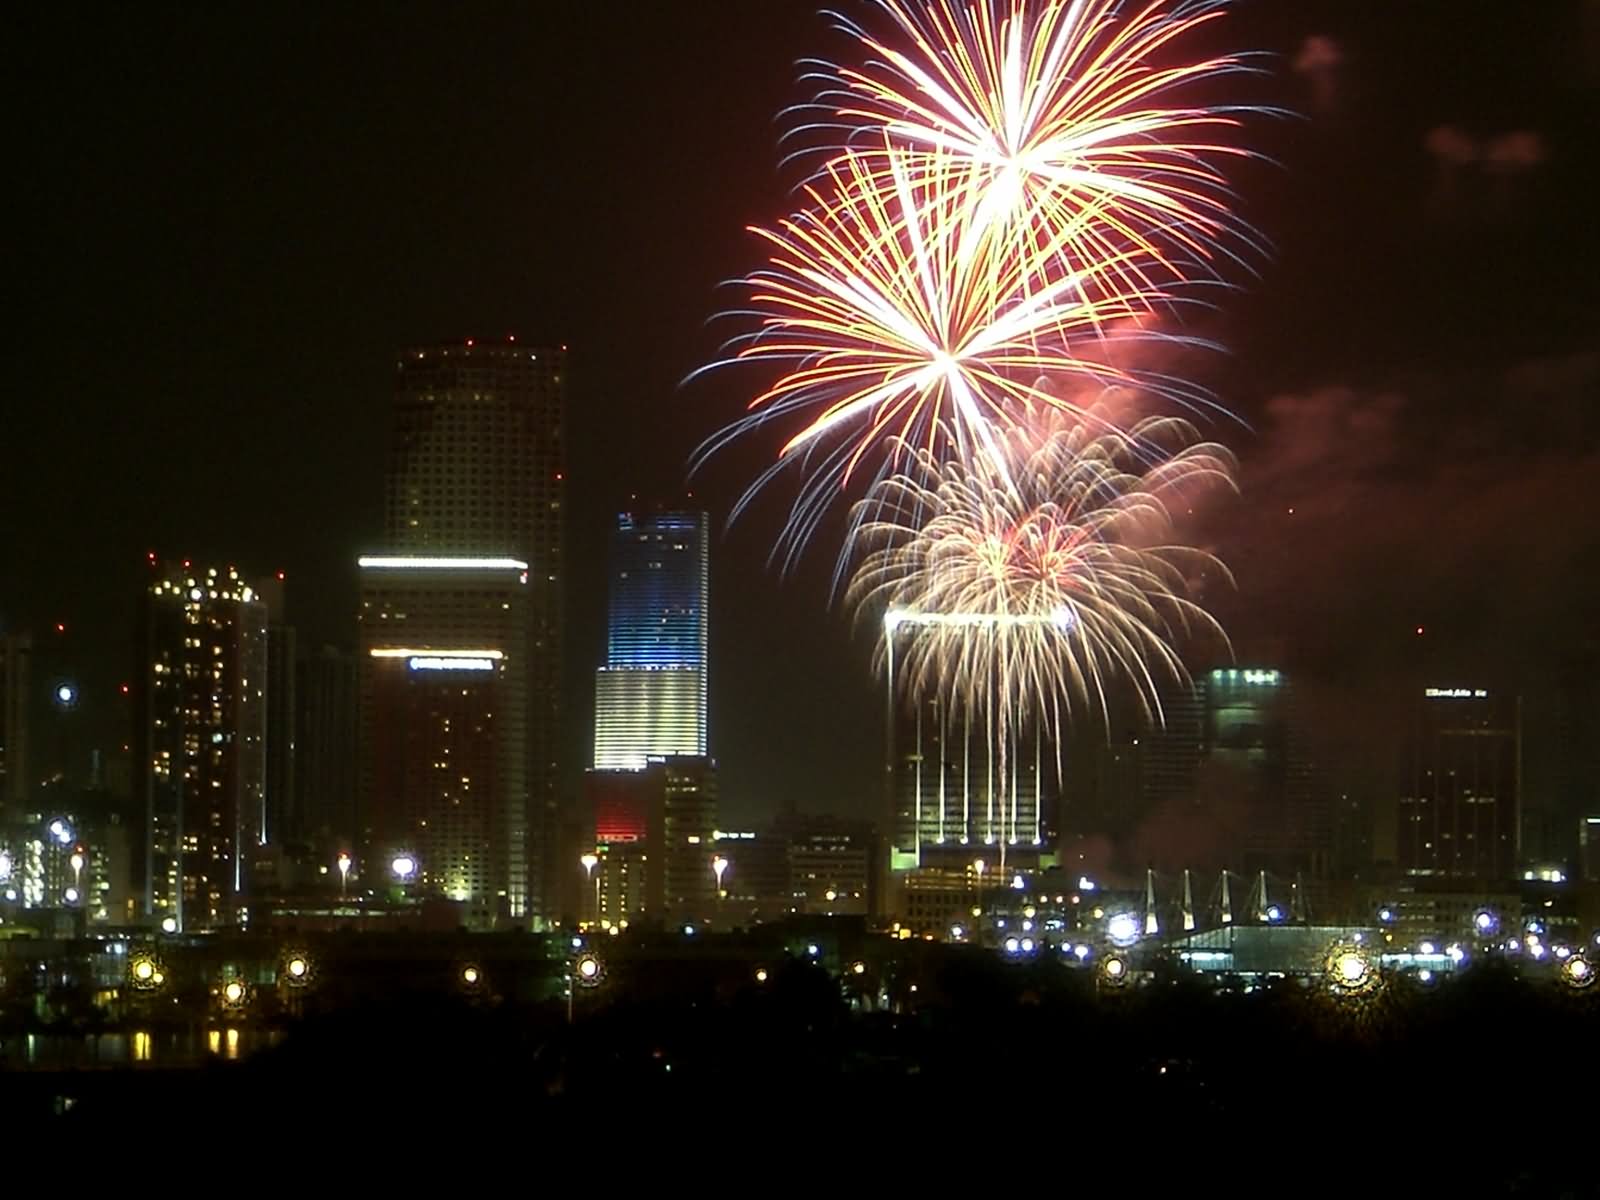 Fireworks Show Over The Miami Tower On Independence Day Of United States Of America